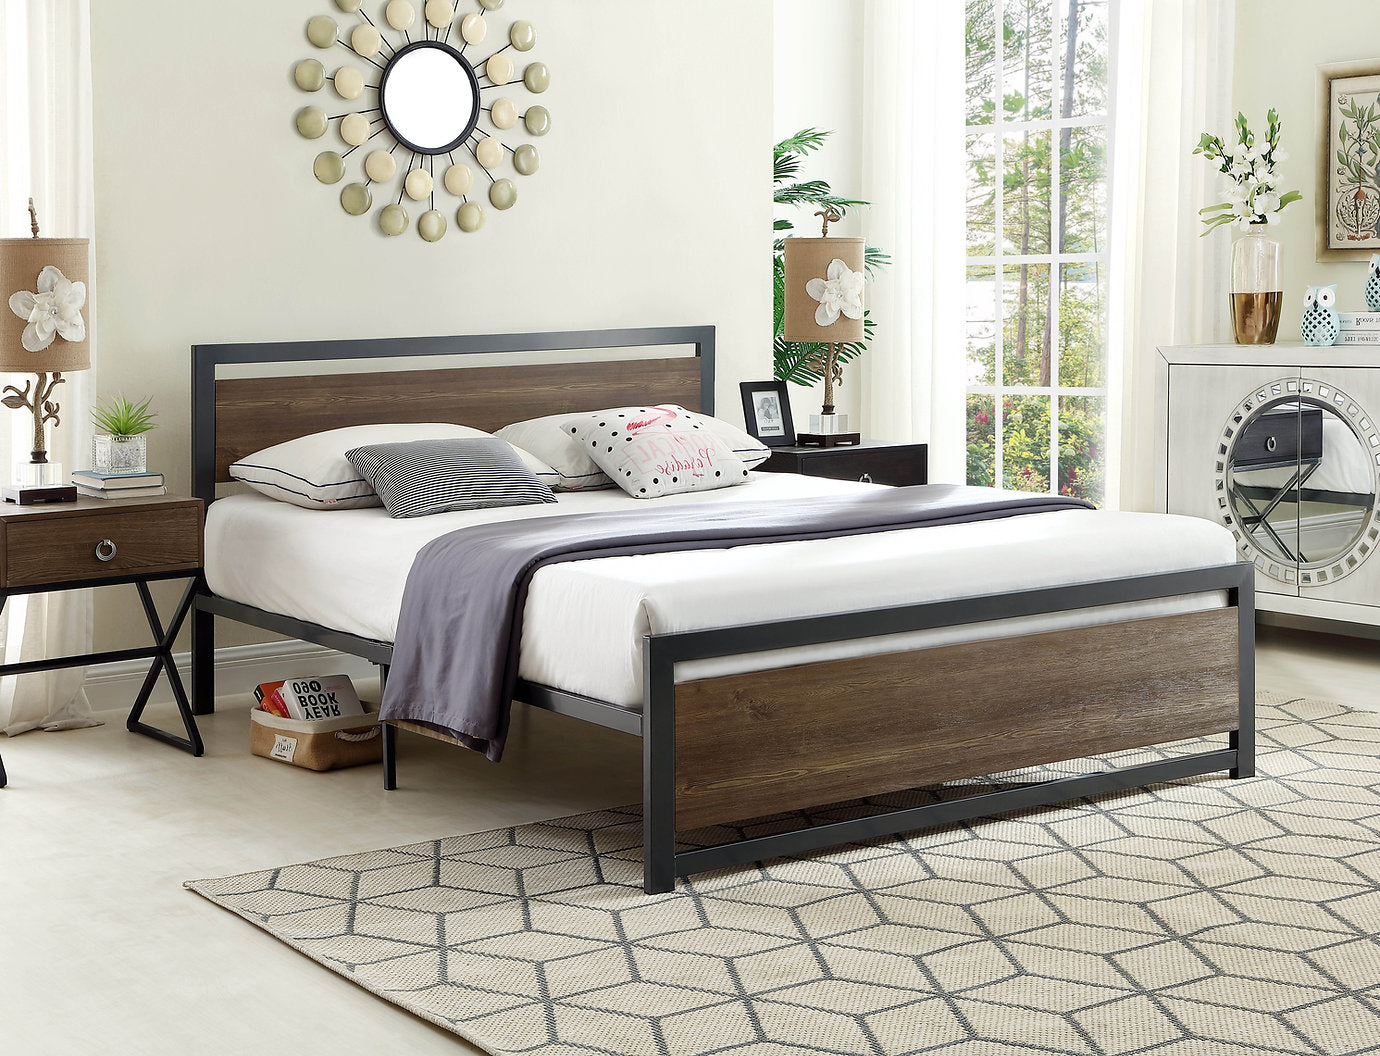 Modern Metal Bed Frame Made from Solid Steel and Wood Panel